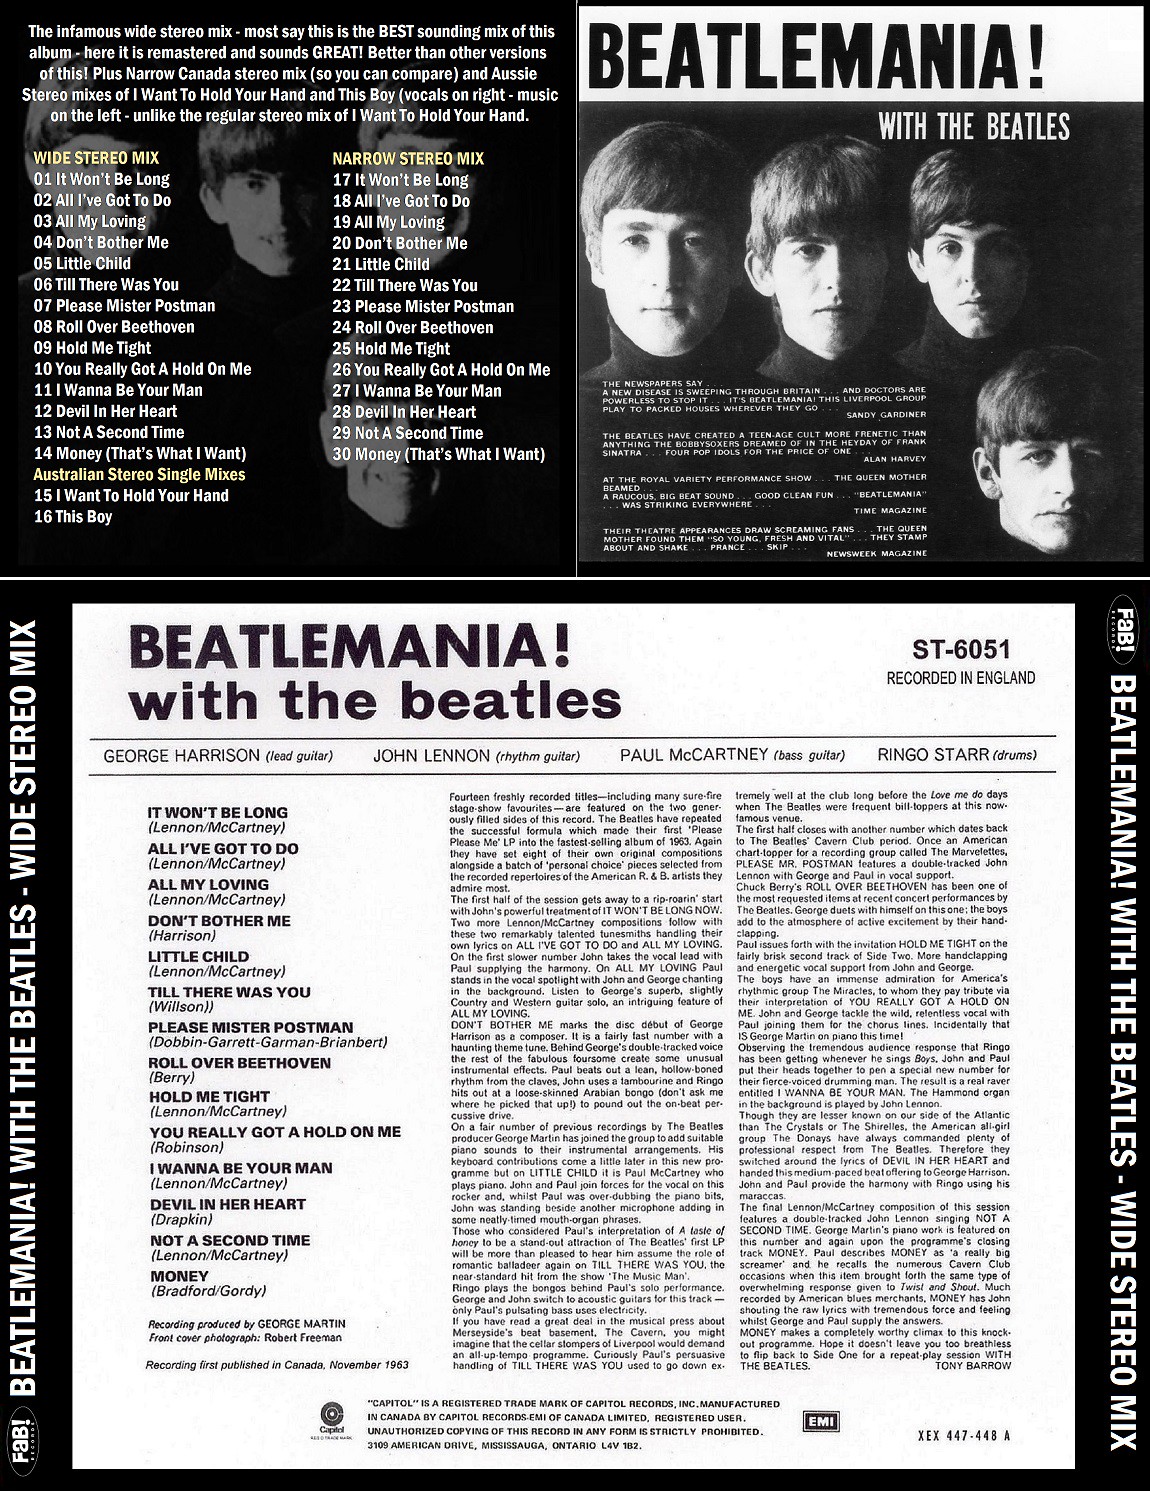 The Beatles - Beatlemania! With The Beatles - Wide Stereo Mix.jpg